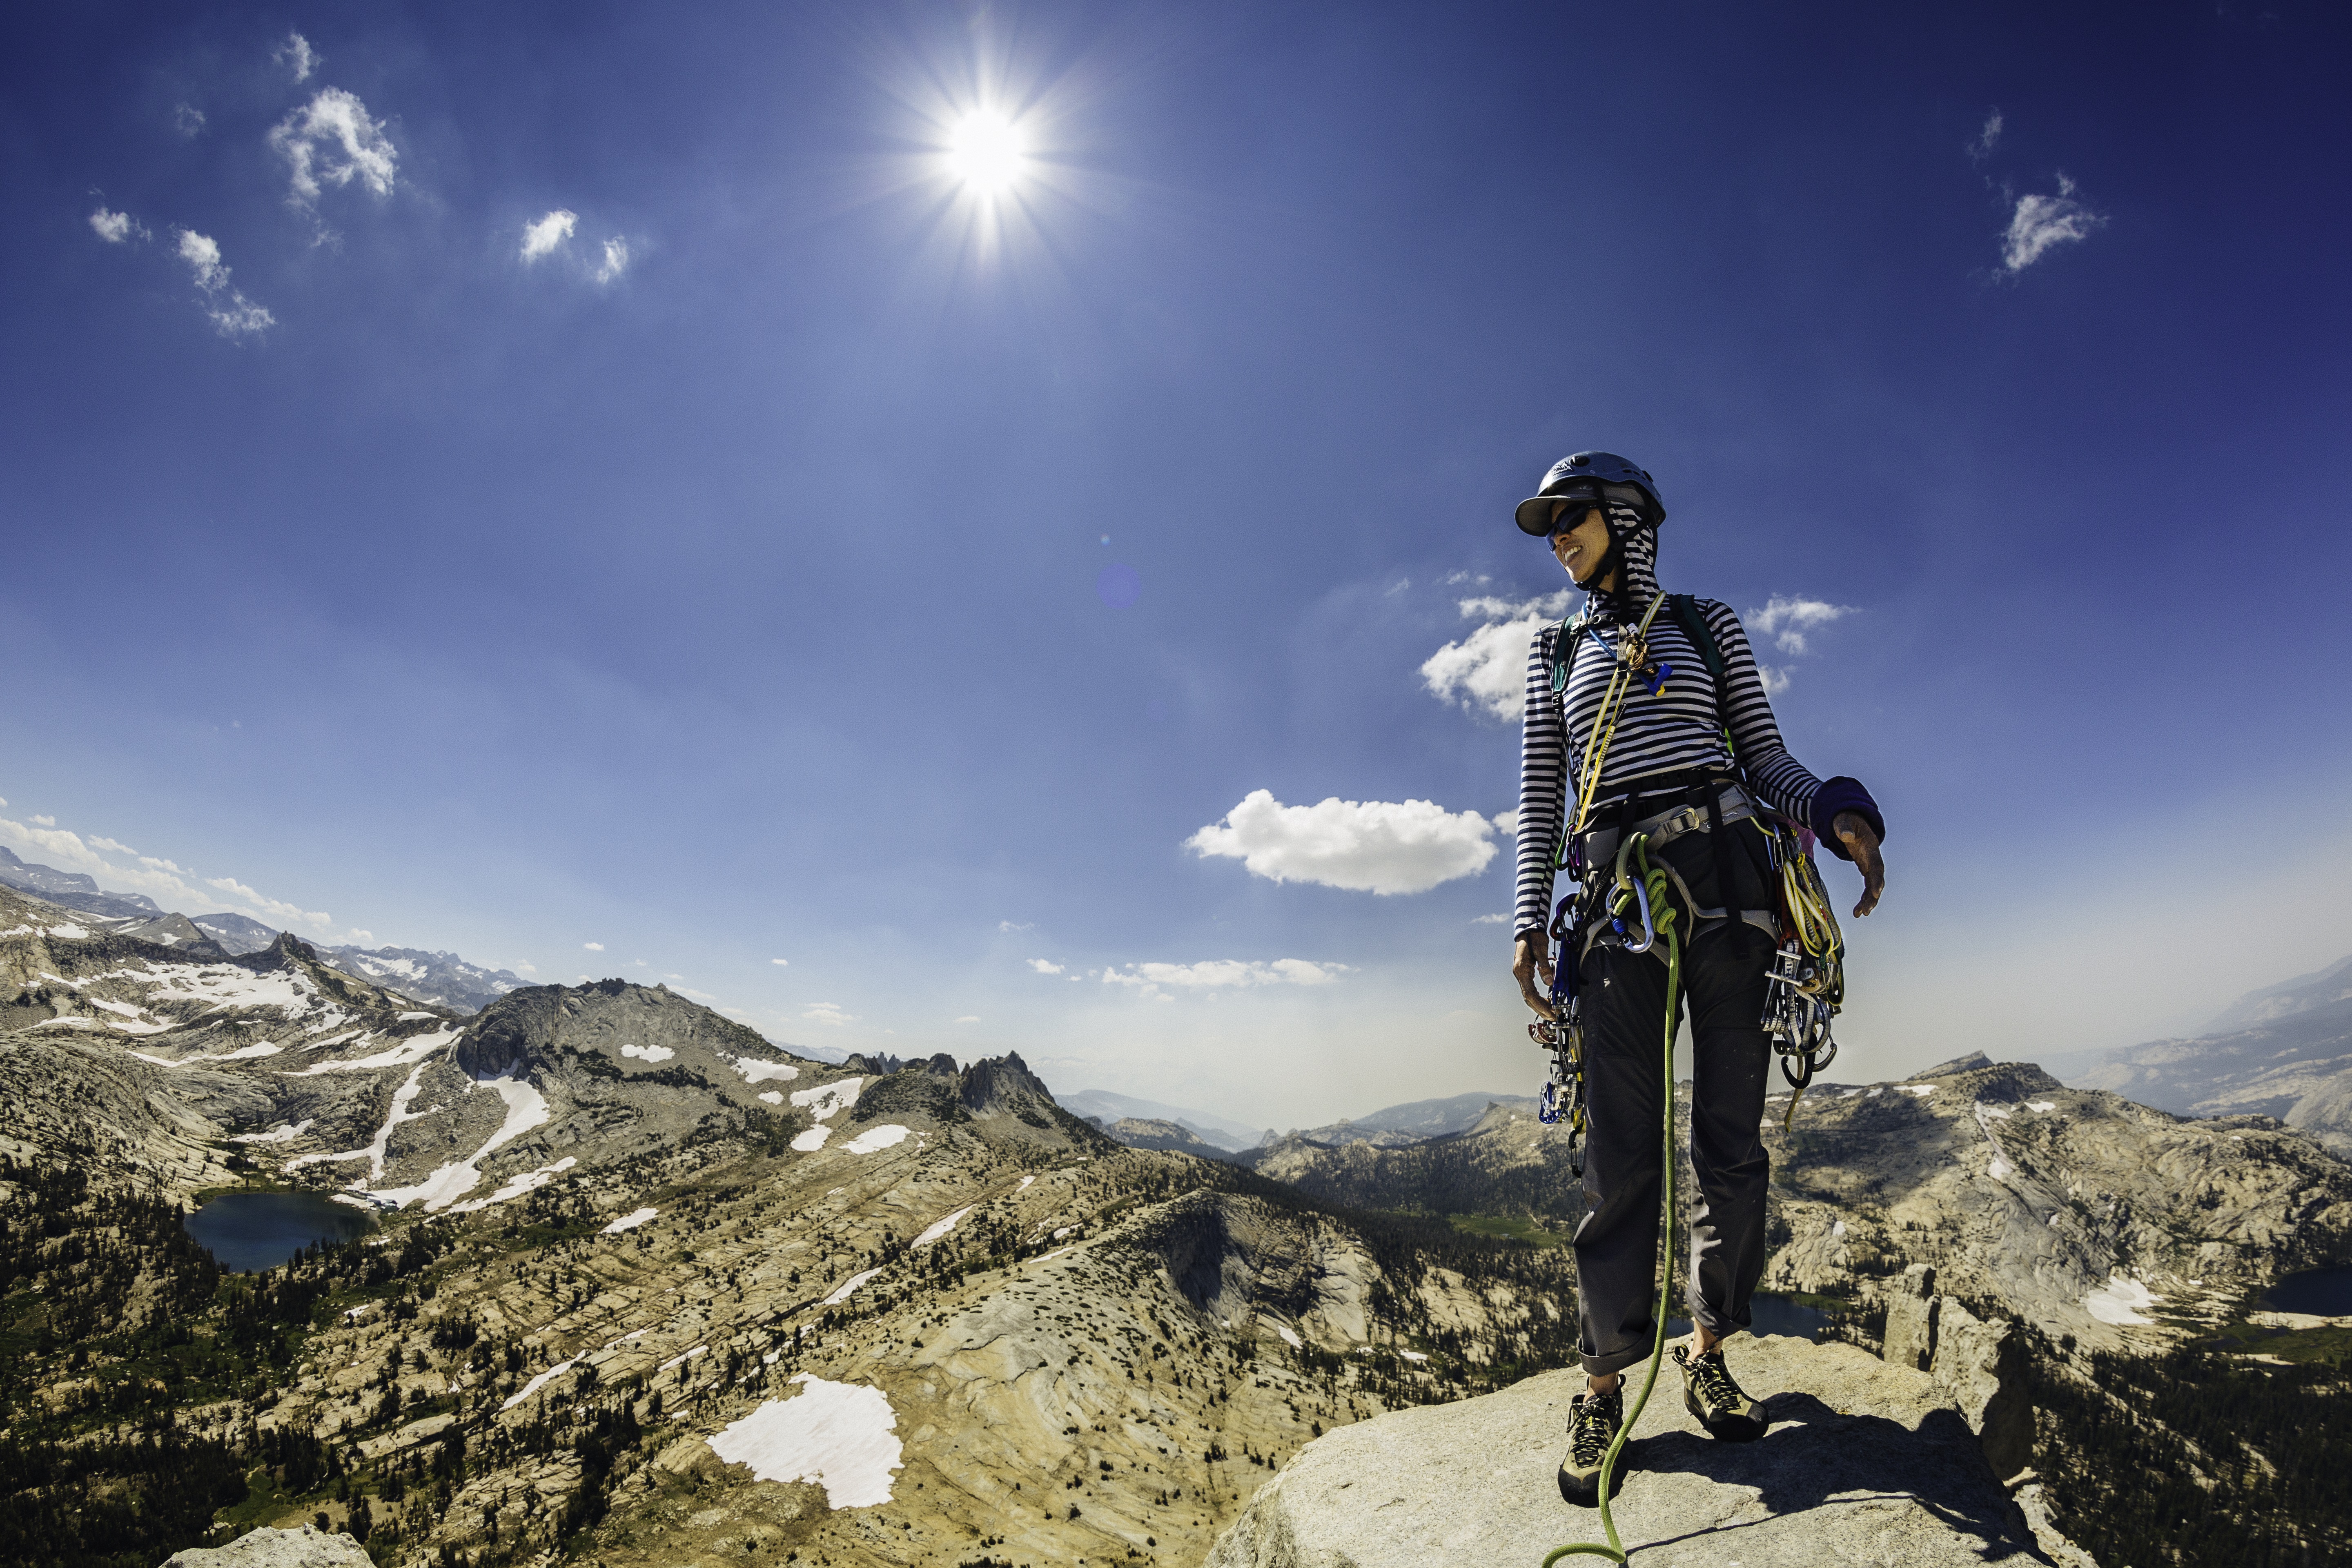 A woman in climbing gear and a helmet looks down at a park covered in pine trees from the summit of a mountain